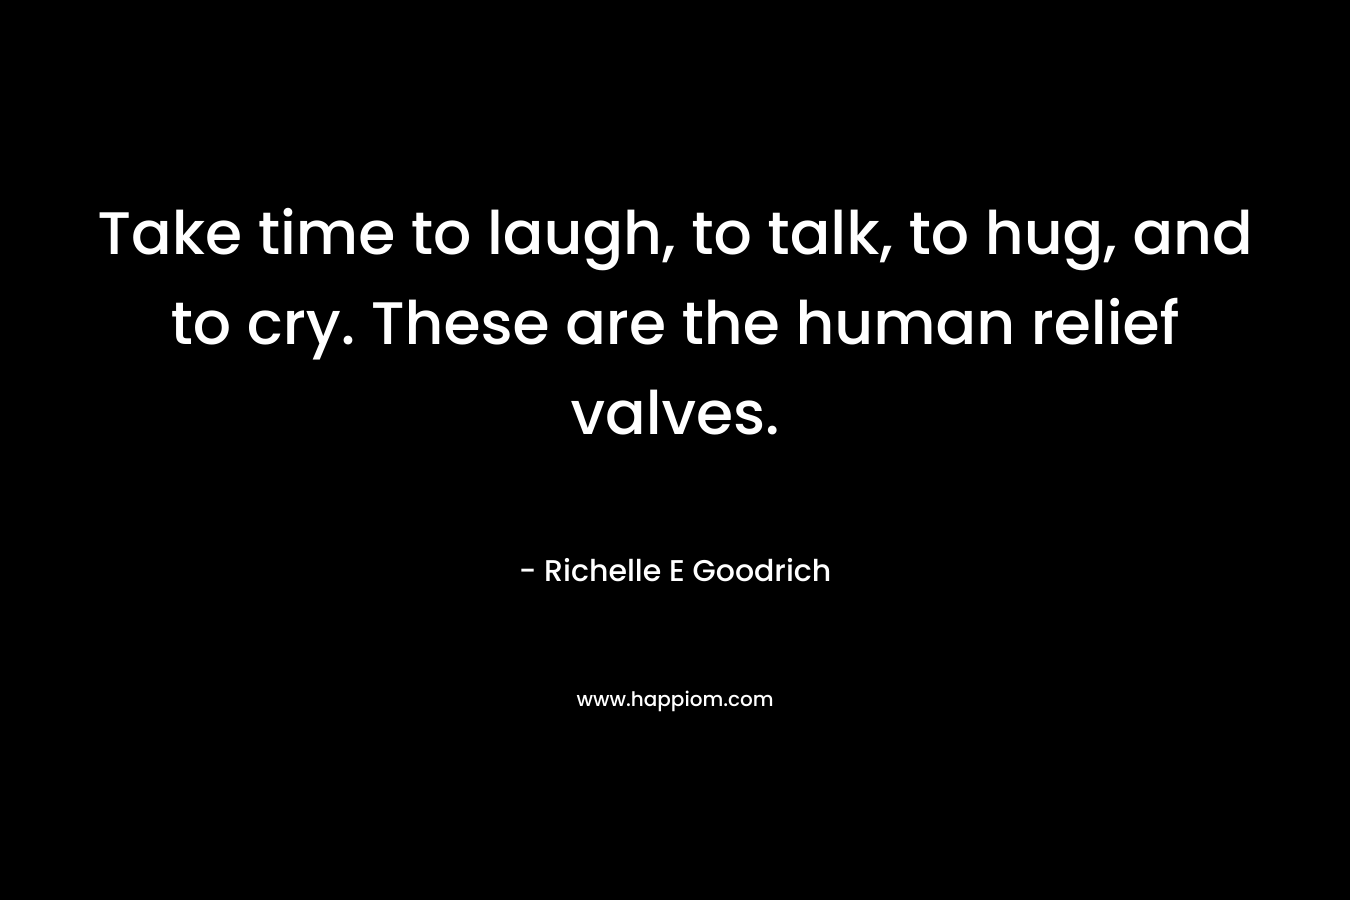 Take time to laugh, to talk, to hug, and to cry. These are the human relief valves. – Richelle E Goodrich